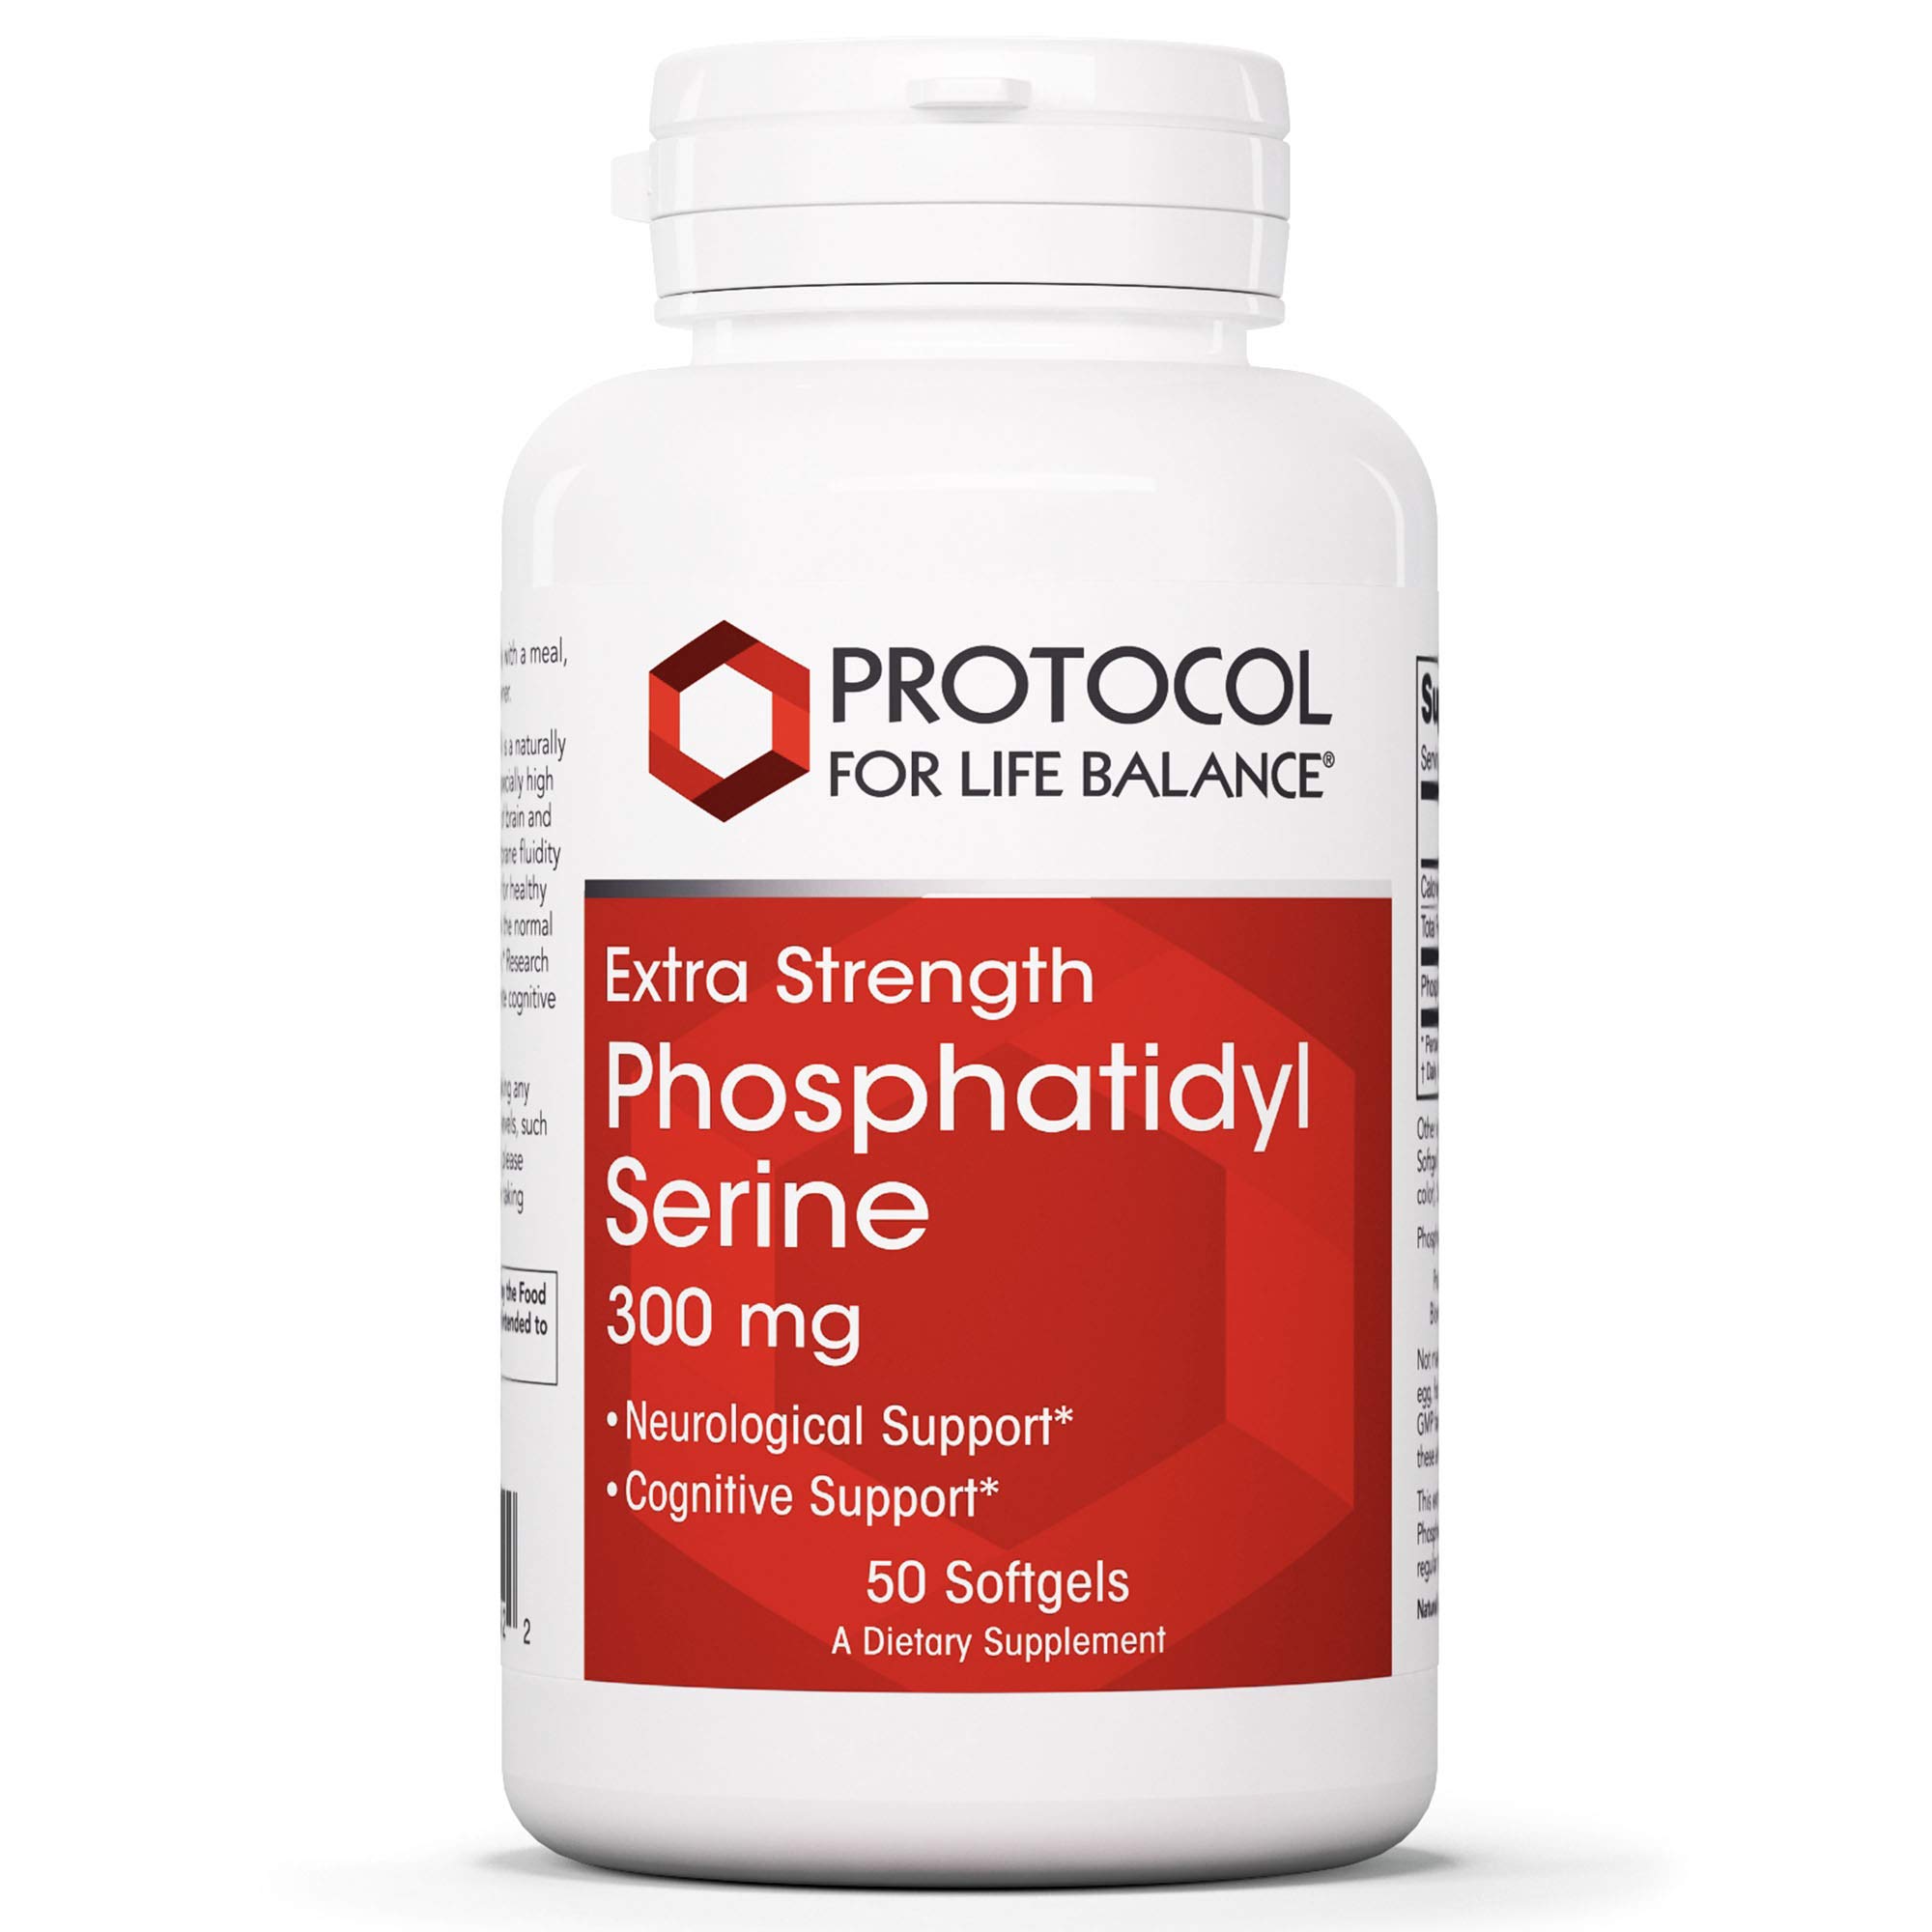 Protocol Phosphatidyl Serine 300mg - with MCT Oil - Neuro and Brain Supplement - 50 Softgels